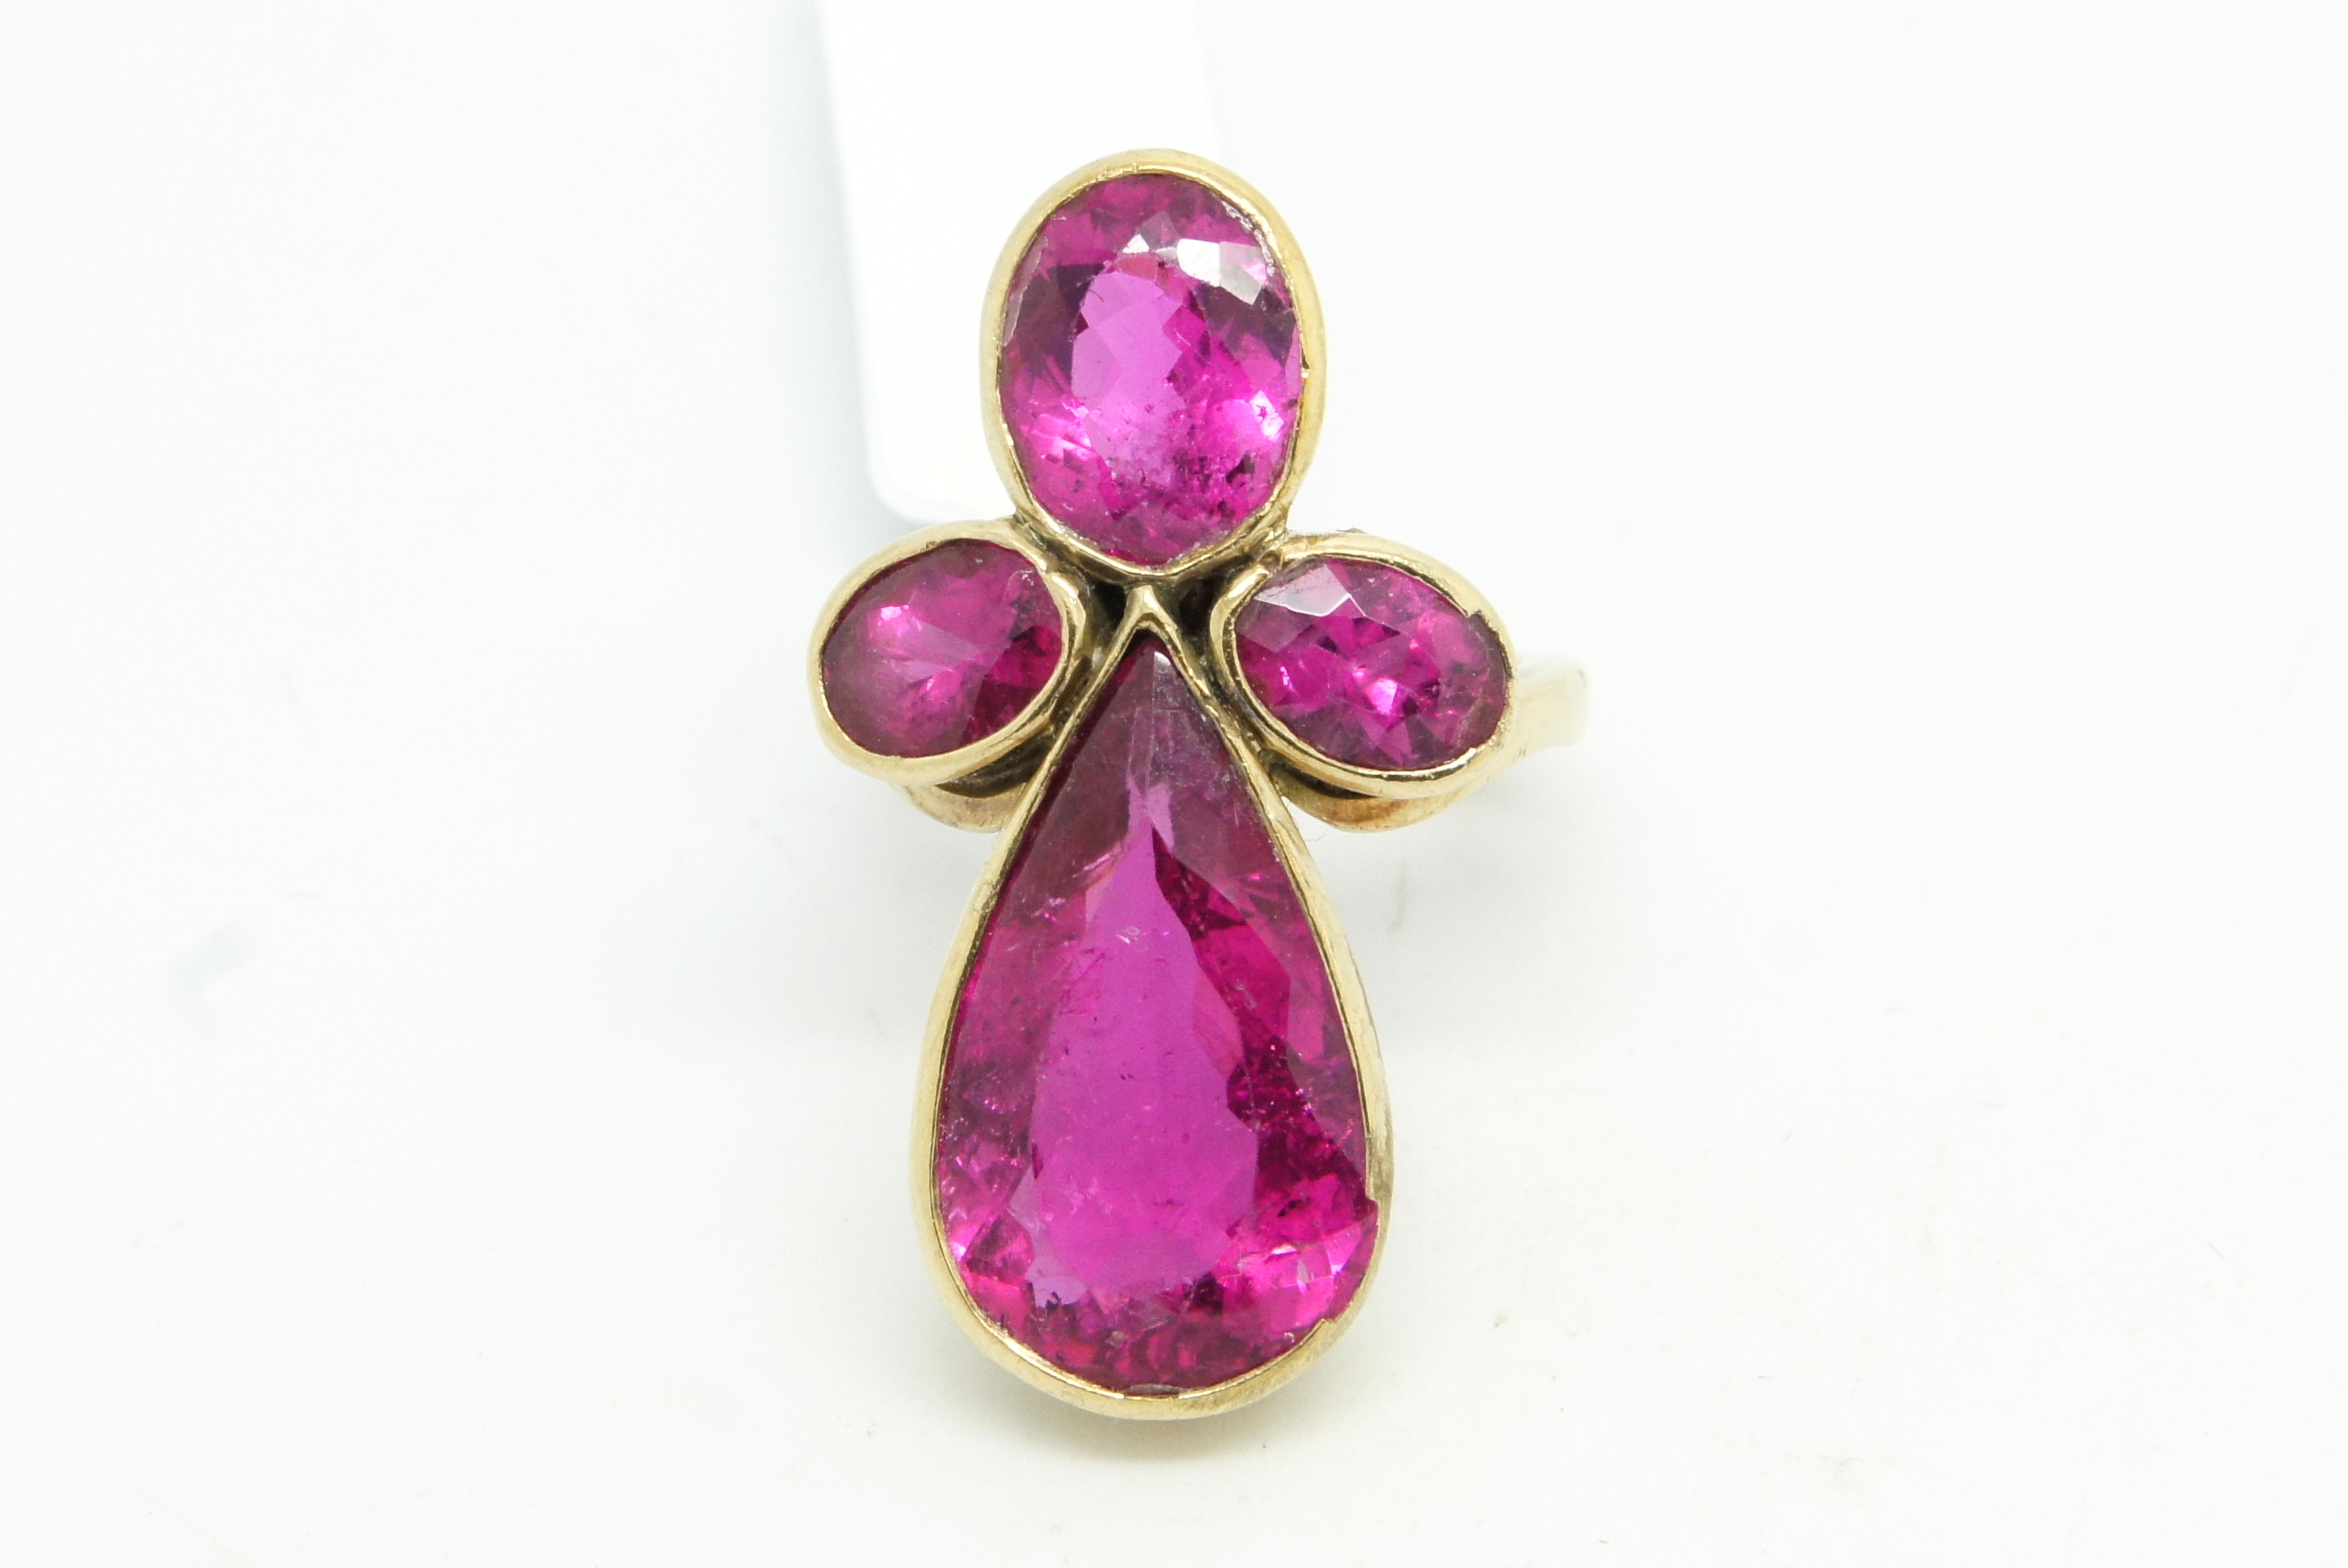 Pink tourmaline dress ring, set with four pink tourmalines, one large pear cut and three oval